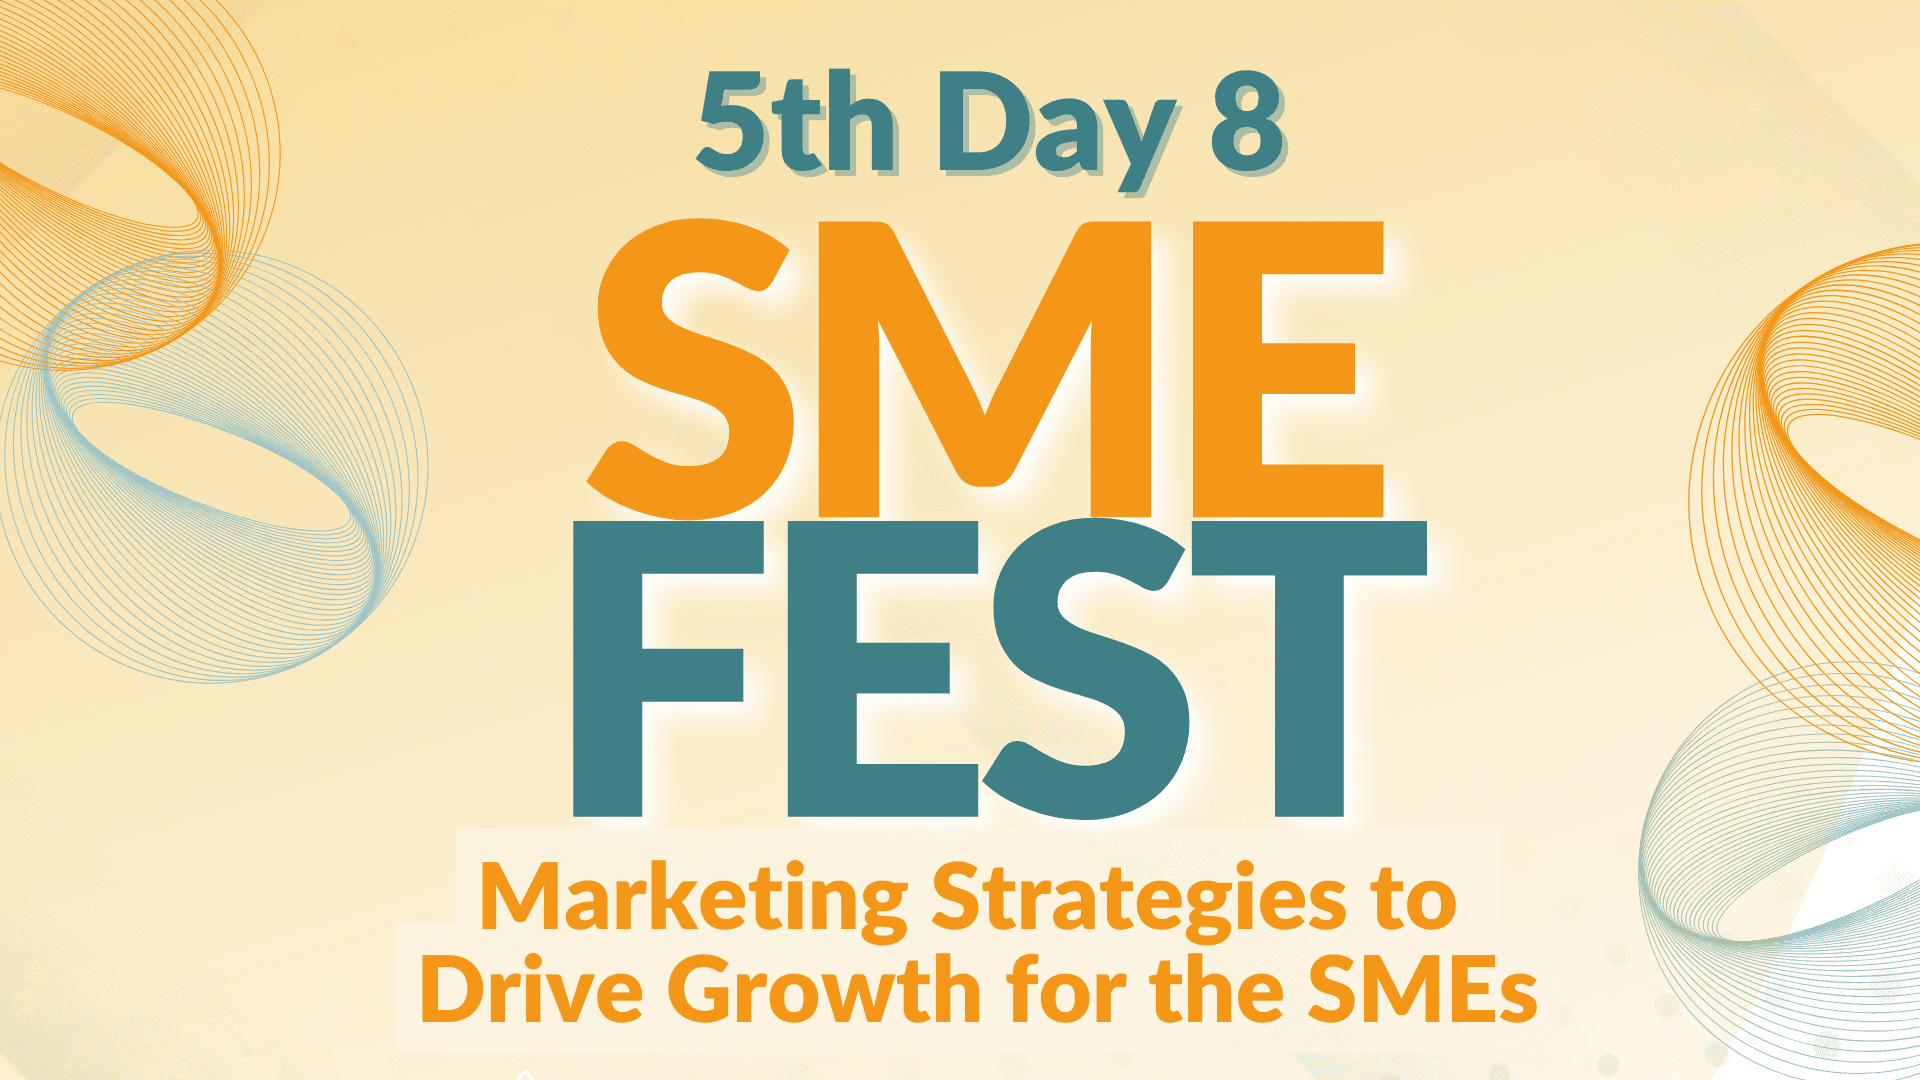 5th Day8 SME FEST by Josiah Go | Plateau: Autopsy of Your Barriers to Growth